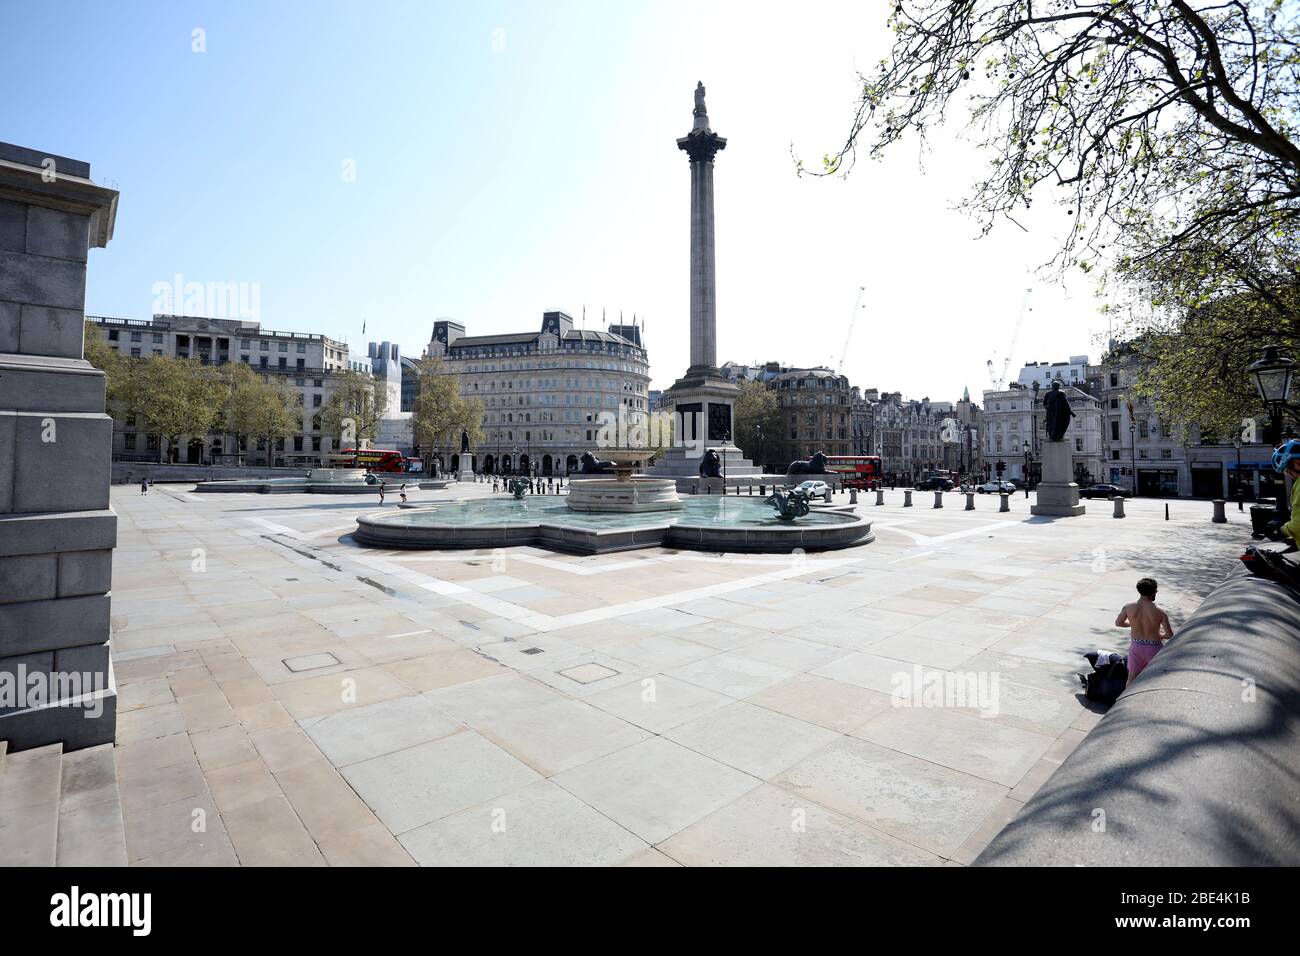 London, UK. 11th Apr, 2020. Day Nineteen of Lockdown in London.  A deserted Trafalgar square in London on Easter Saturday. It is the first public holiday of the year, and many people enjoy the long weekend by going out and about or on holiday, but this year the country is on lockdown due to the COVID-19 Coronavirus pandemic. People are not allowed to leave home except for minimal food shopping, medical treatment, exercise - once a day, and essential work.  COVID-19 Coronavirus lockdown, London, UK, on April 11, 2020 Credit: Paul Marriott/Alamy Live News Stock Photo